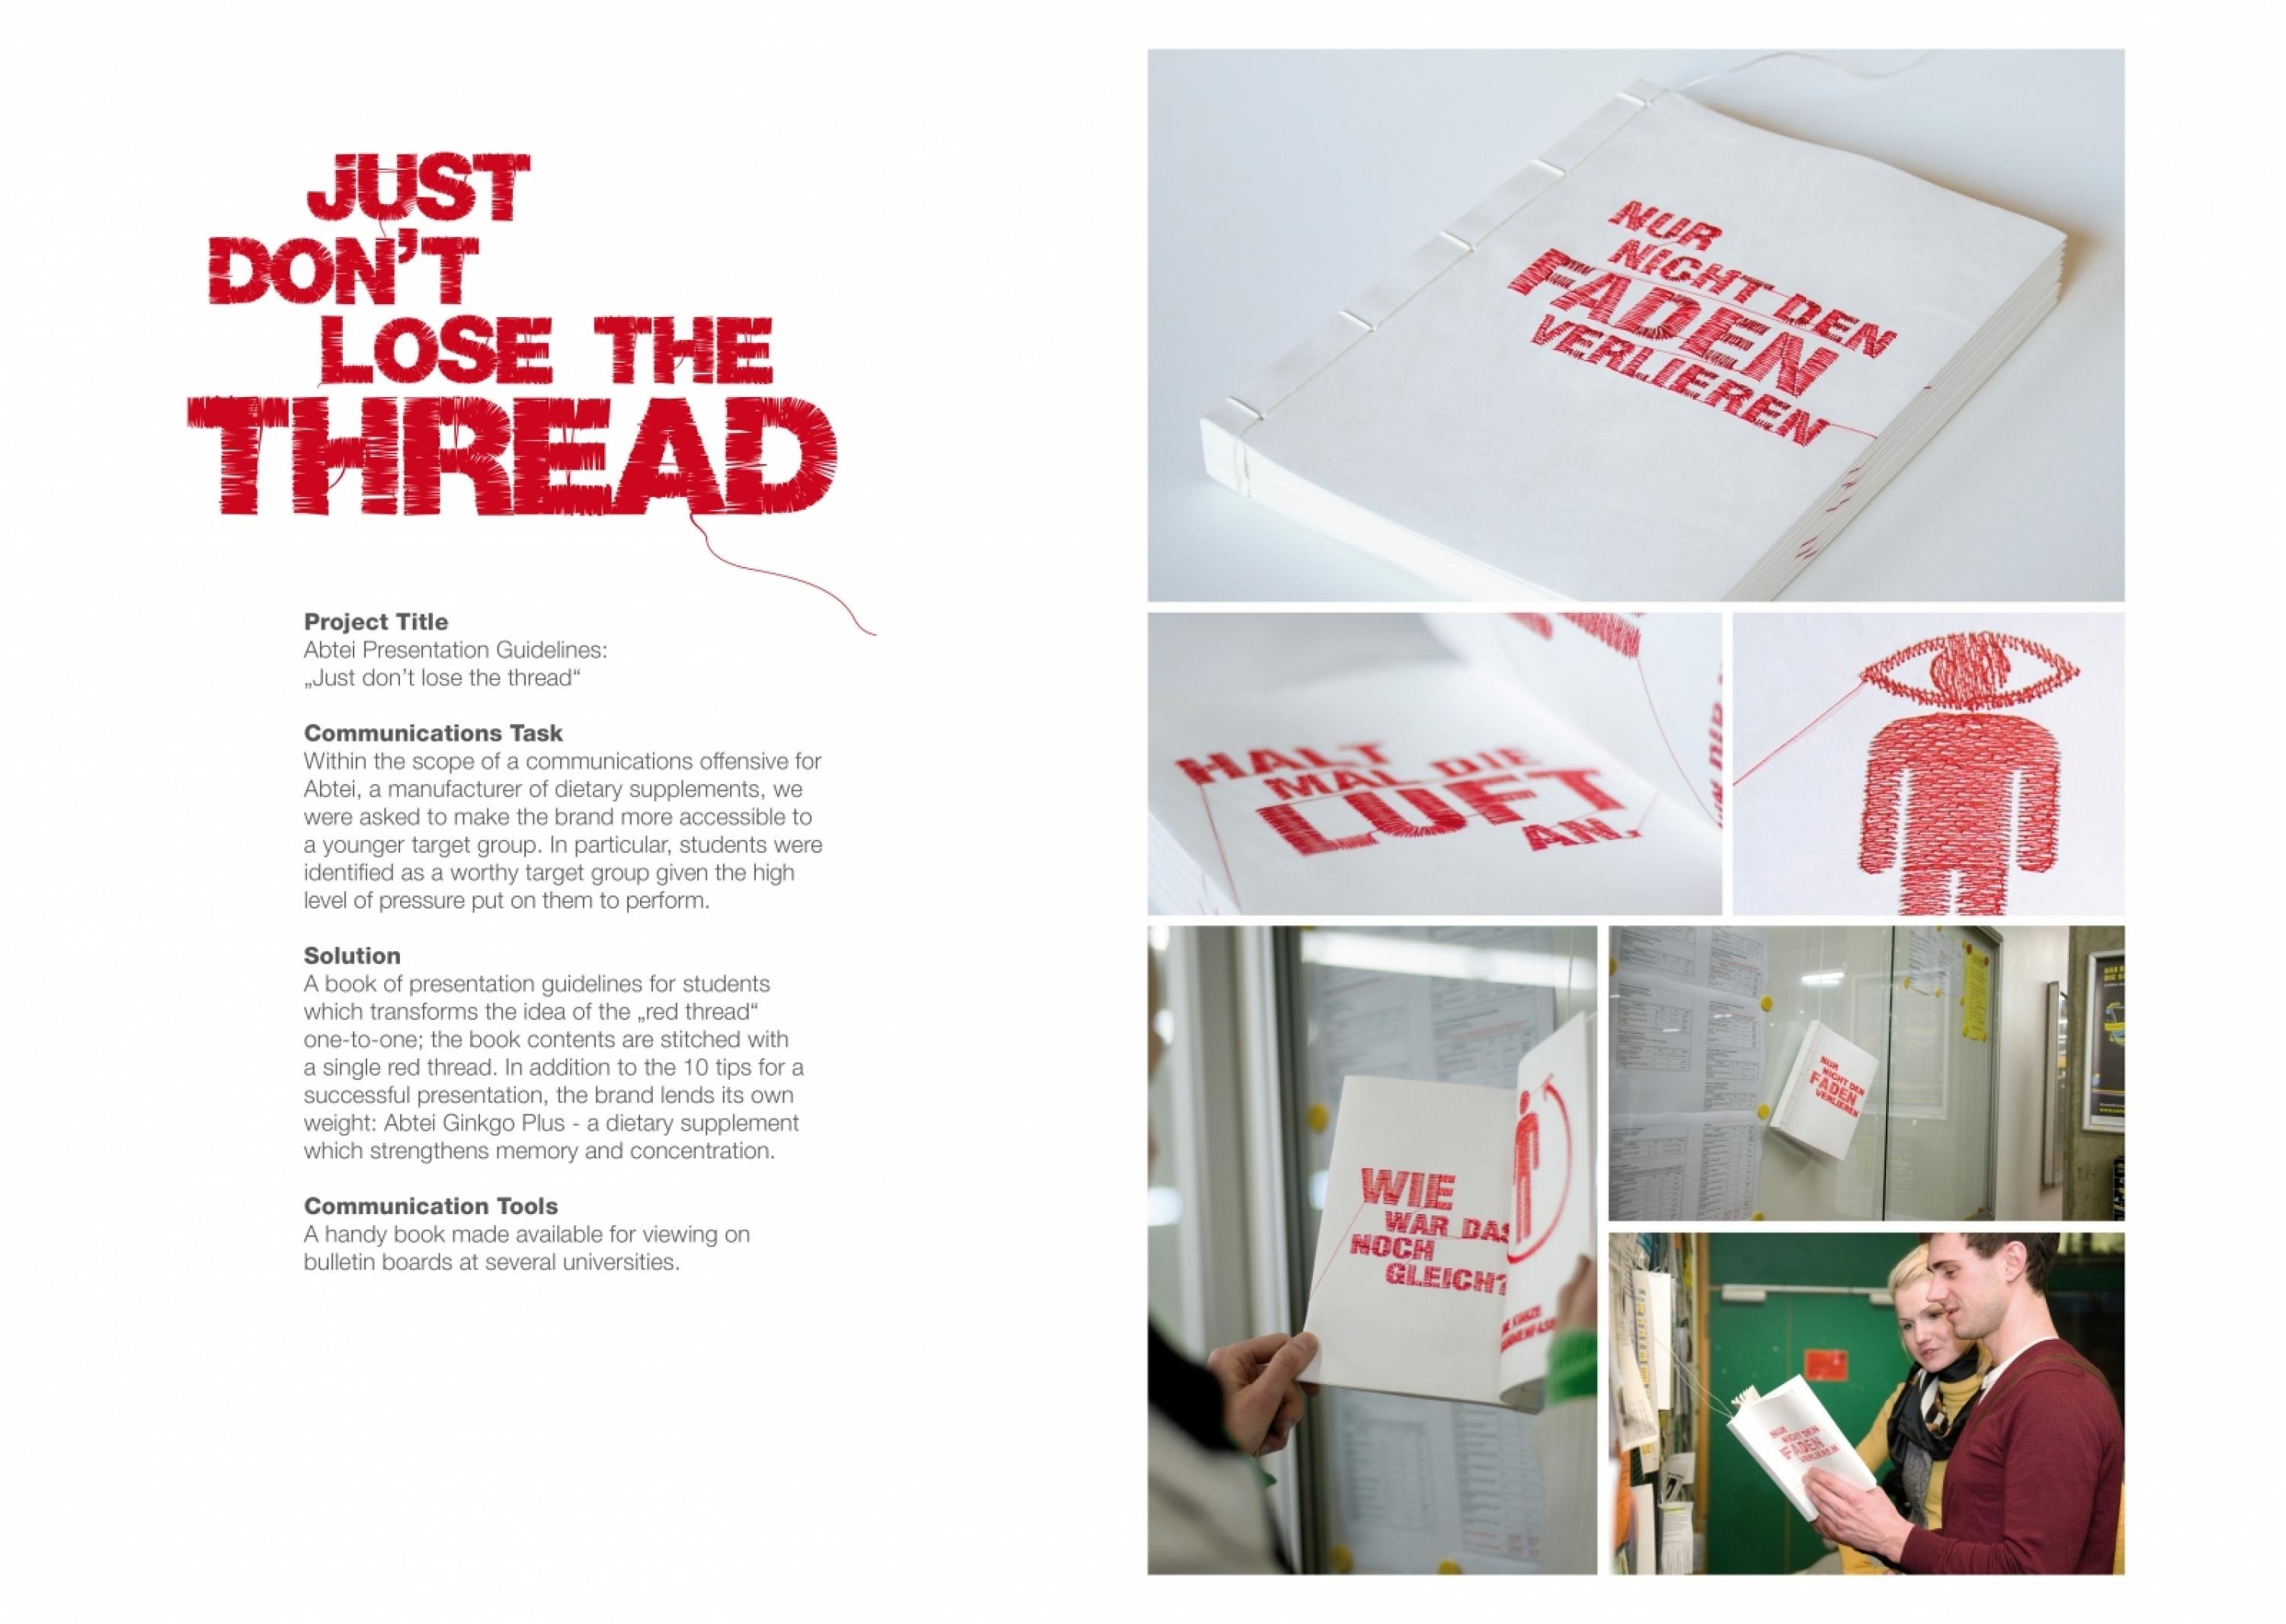 THE RED-THREAT-BOOK